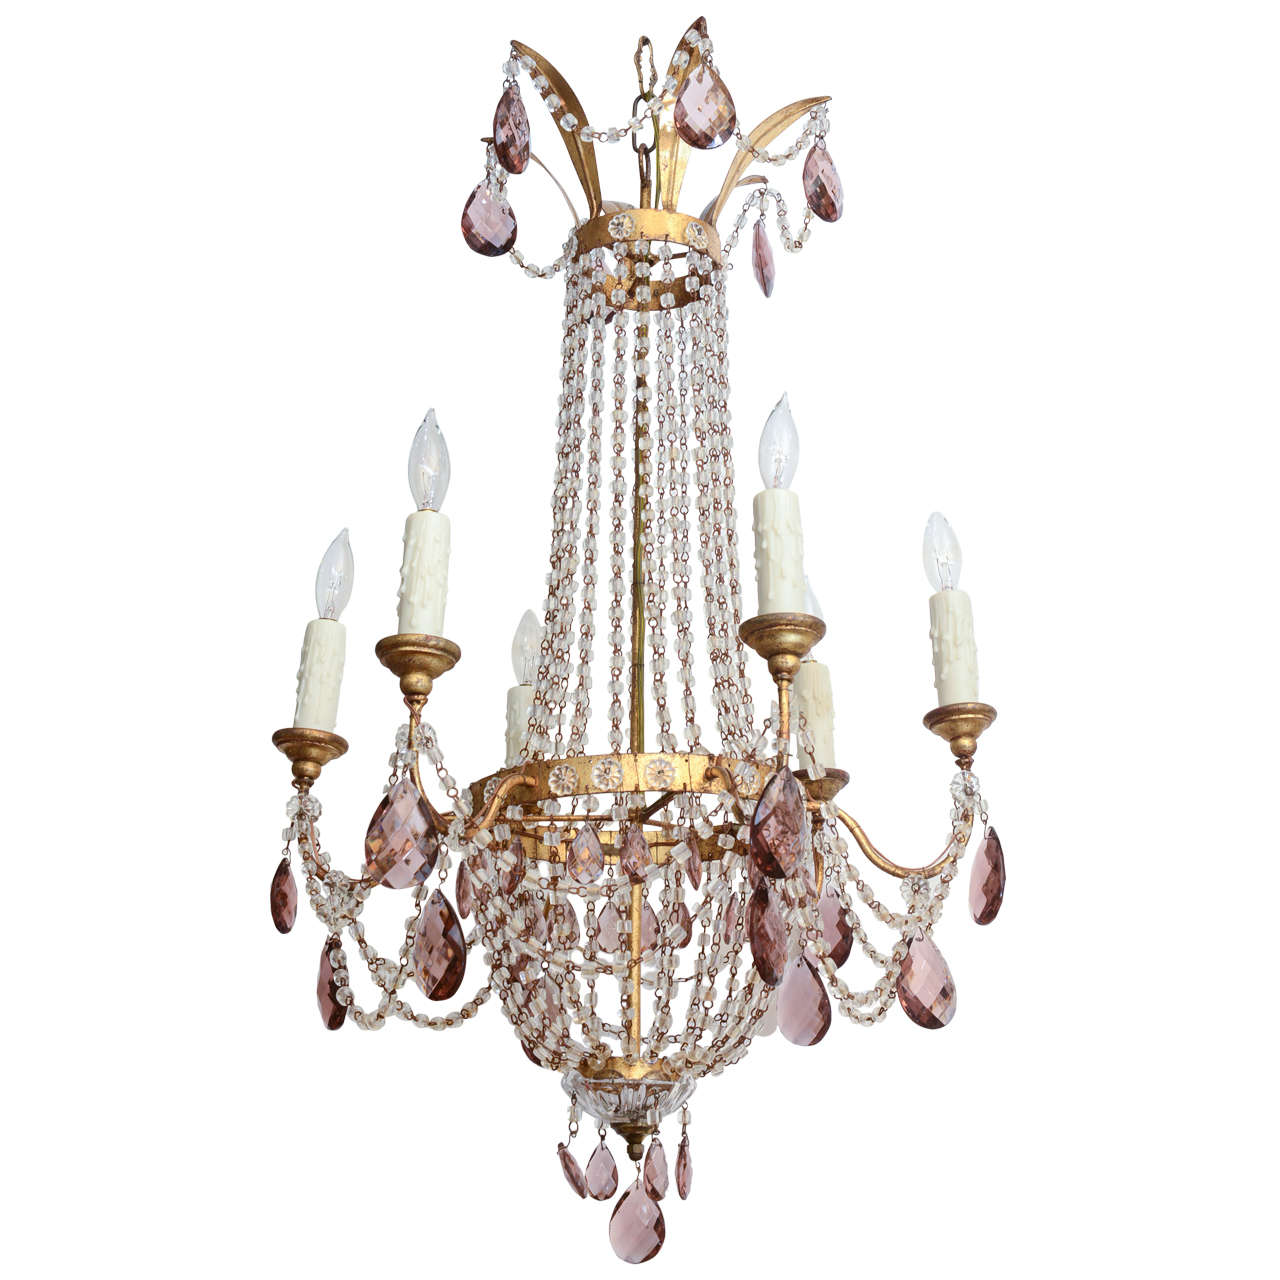 Empire Form Italian Chandelier with Amethyst Colored Accent Crystals